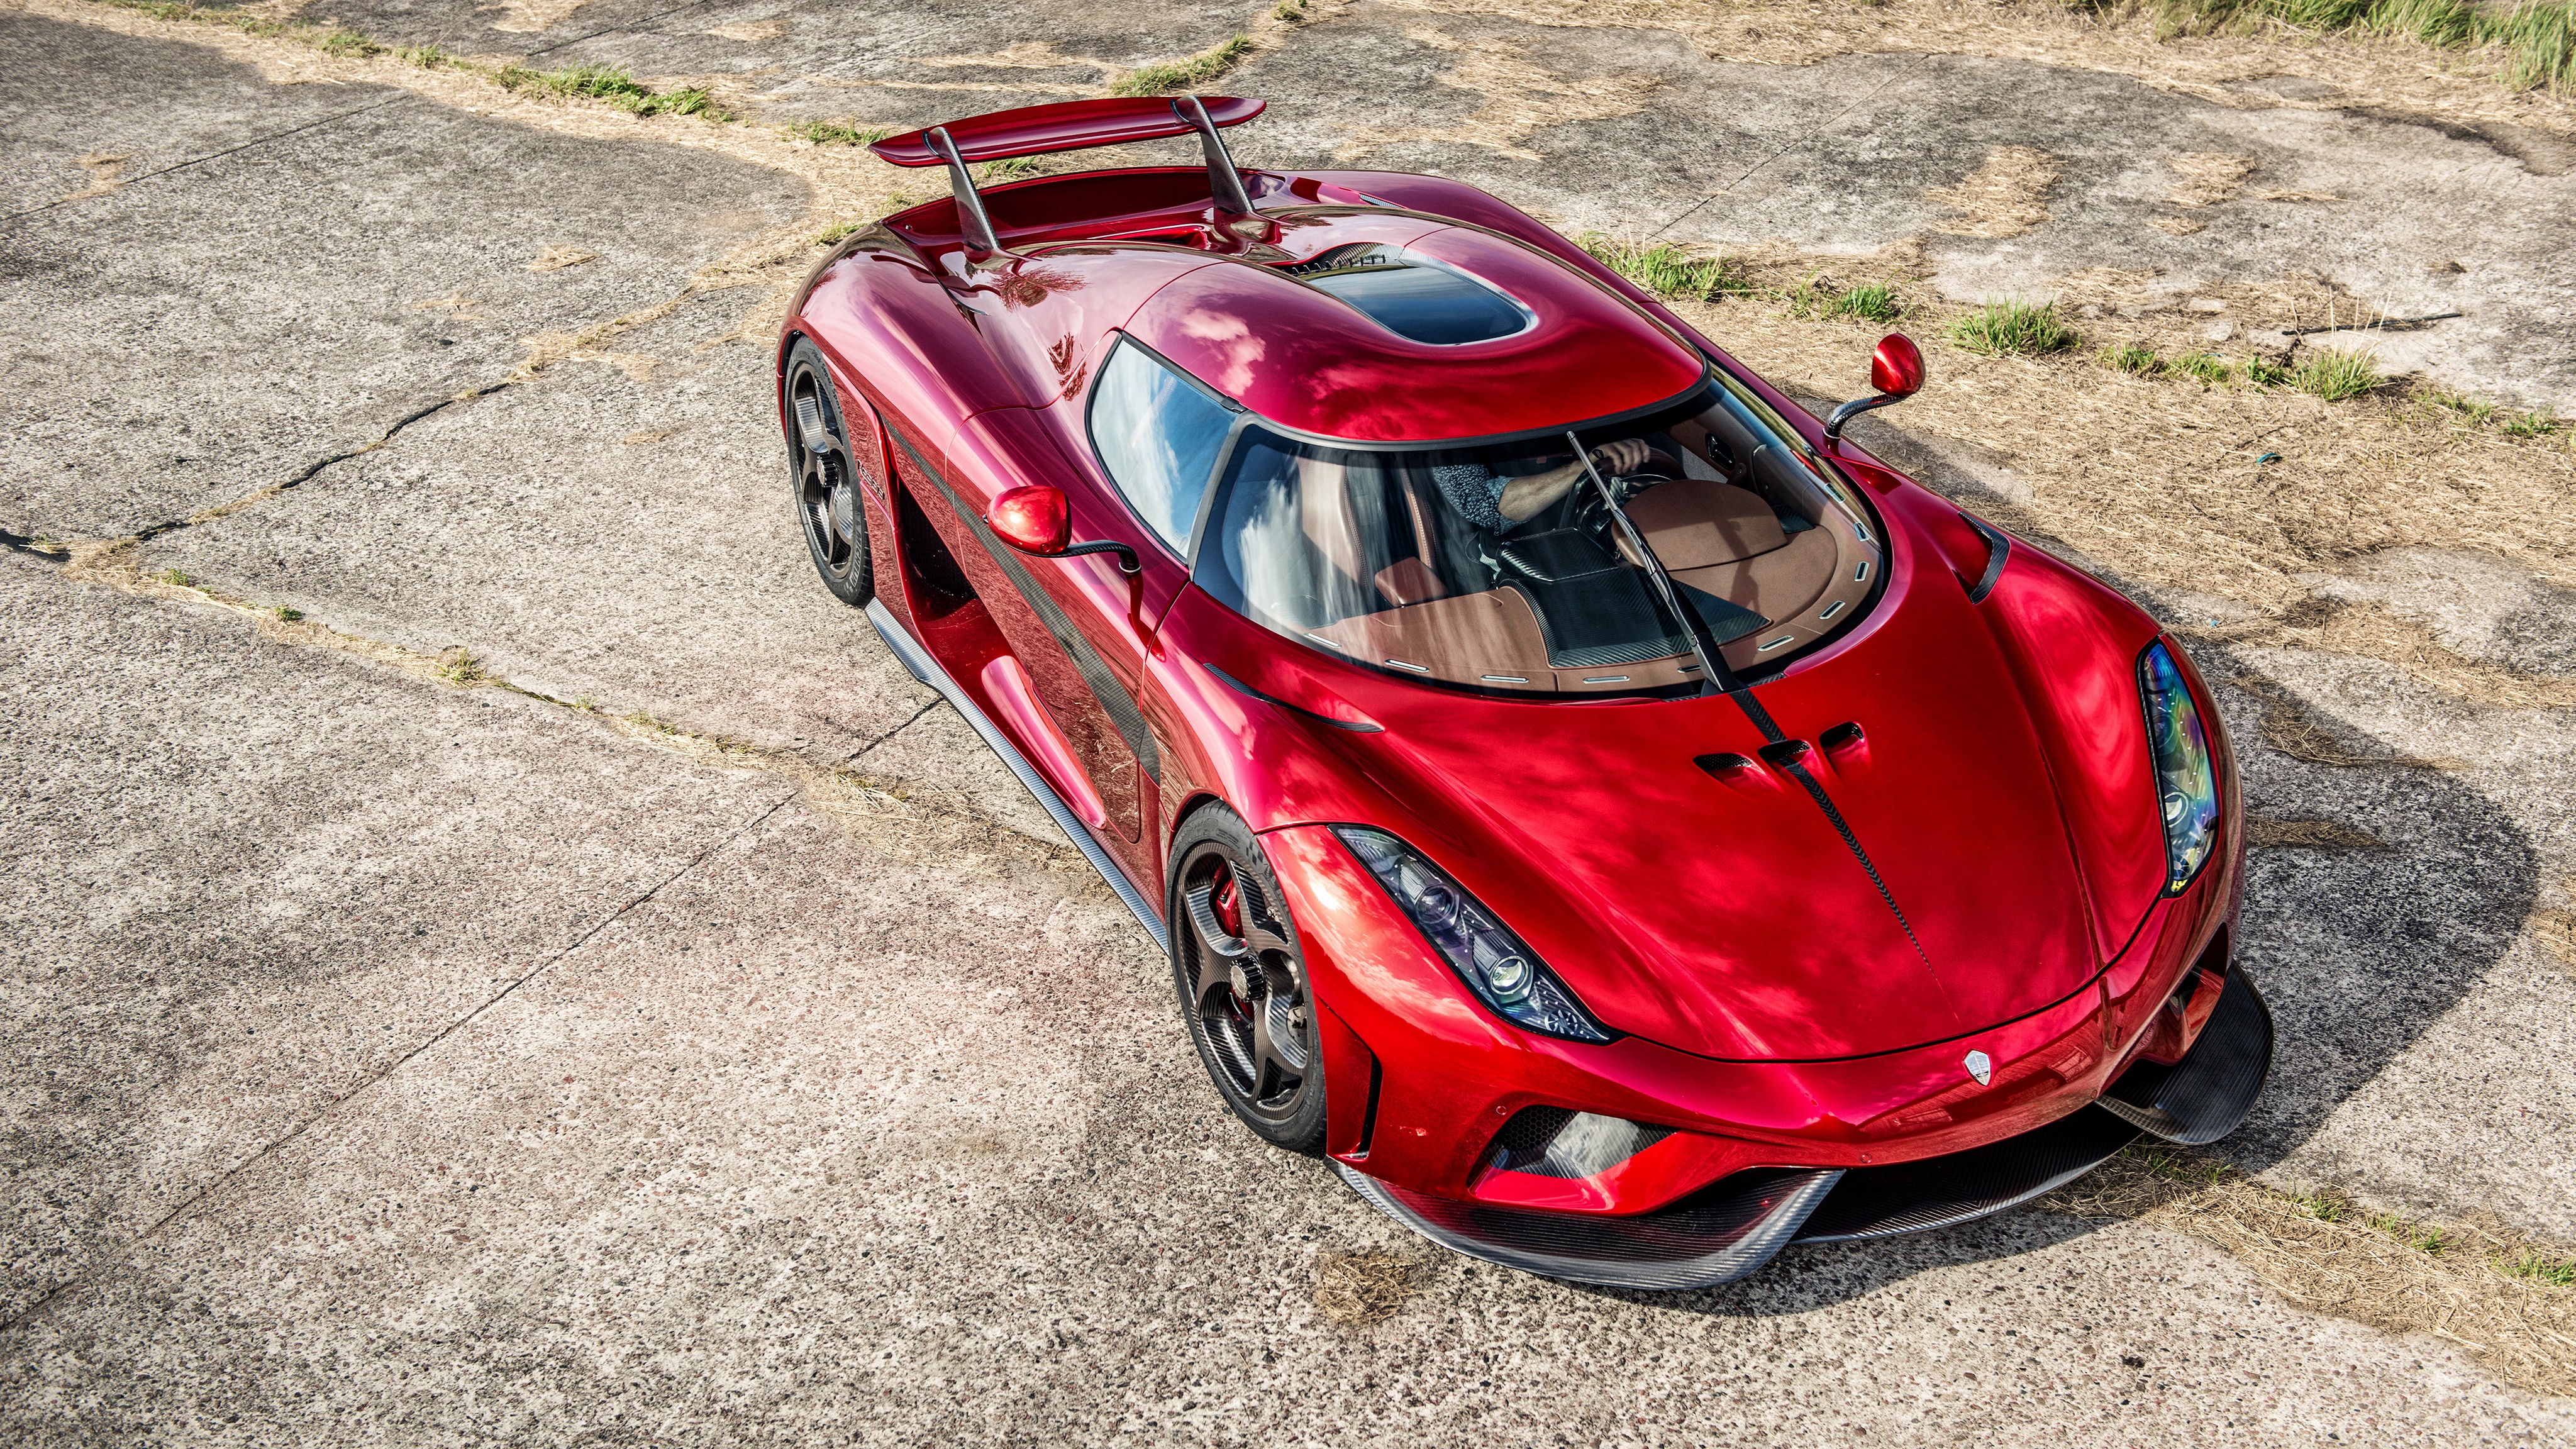 Red Sports Car Koenigsegg Regera Top View Wallpapers And Images